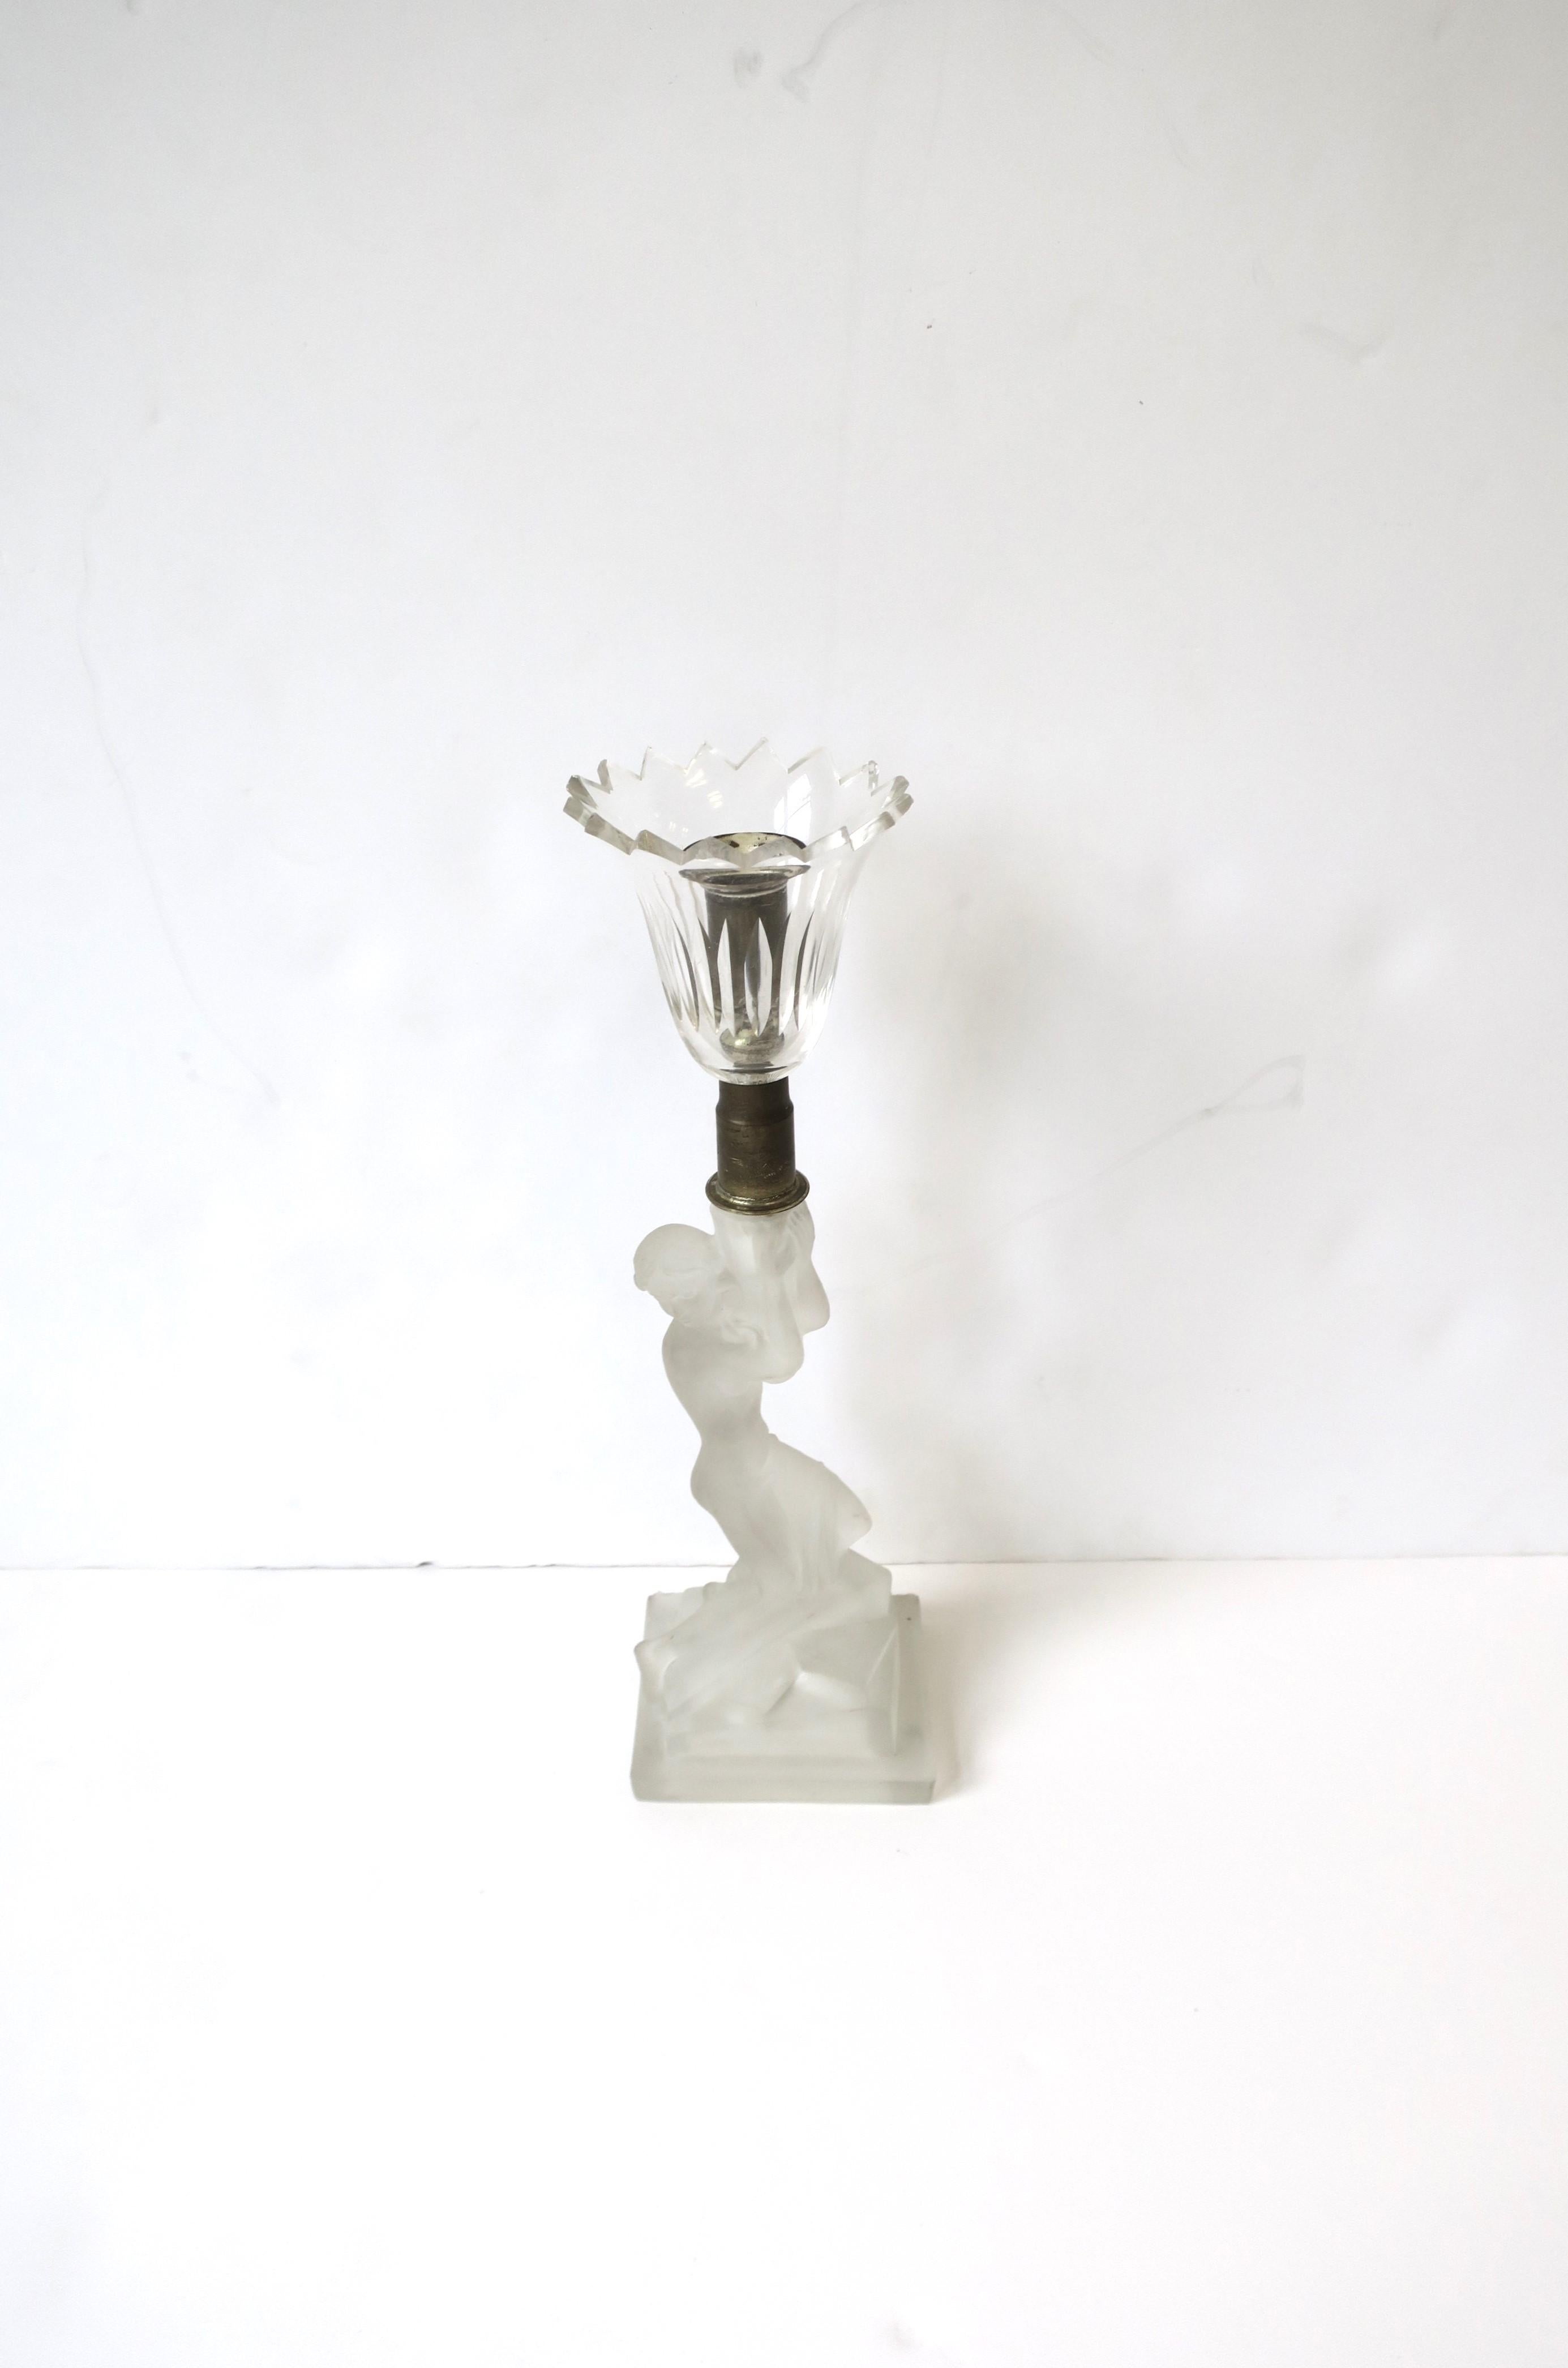 Glass Art Deco Female Figurative Sculpture Candlestick Holder, Early 20th Century For Sale